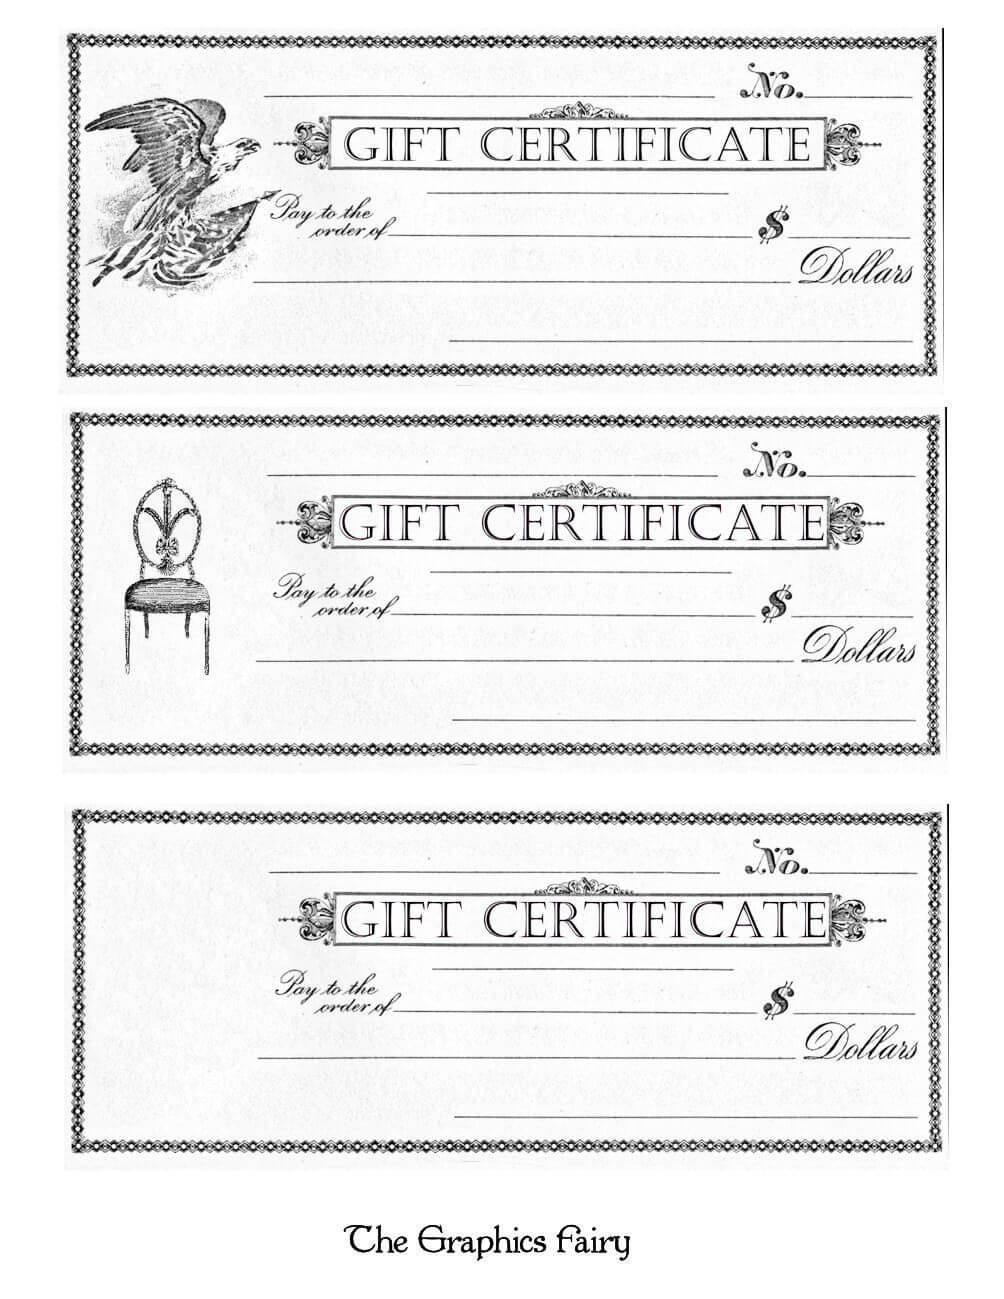 Online Gift Certificate Maker Elegant Free Printable Gift With Regard To Black And White Gift Certificate Template Free